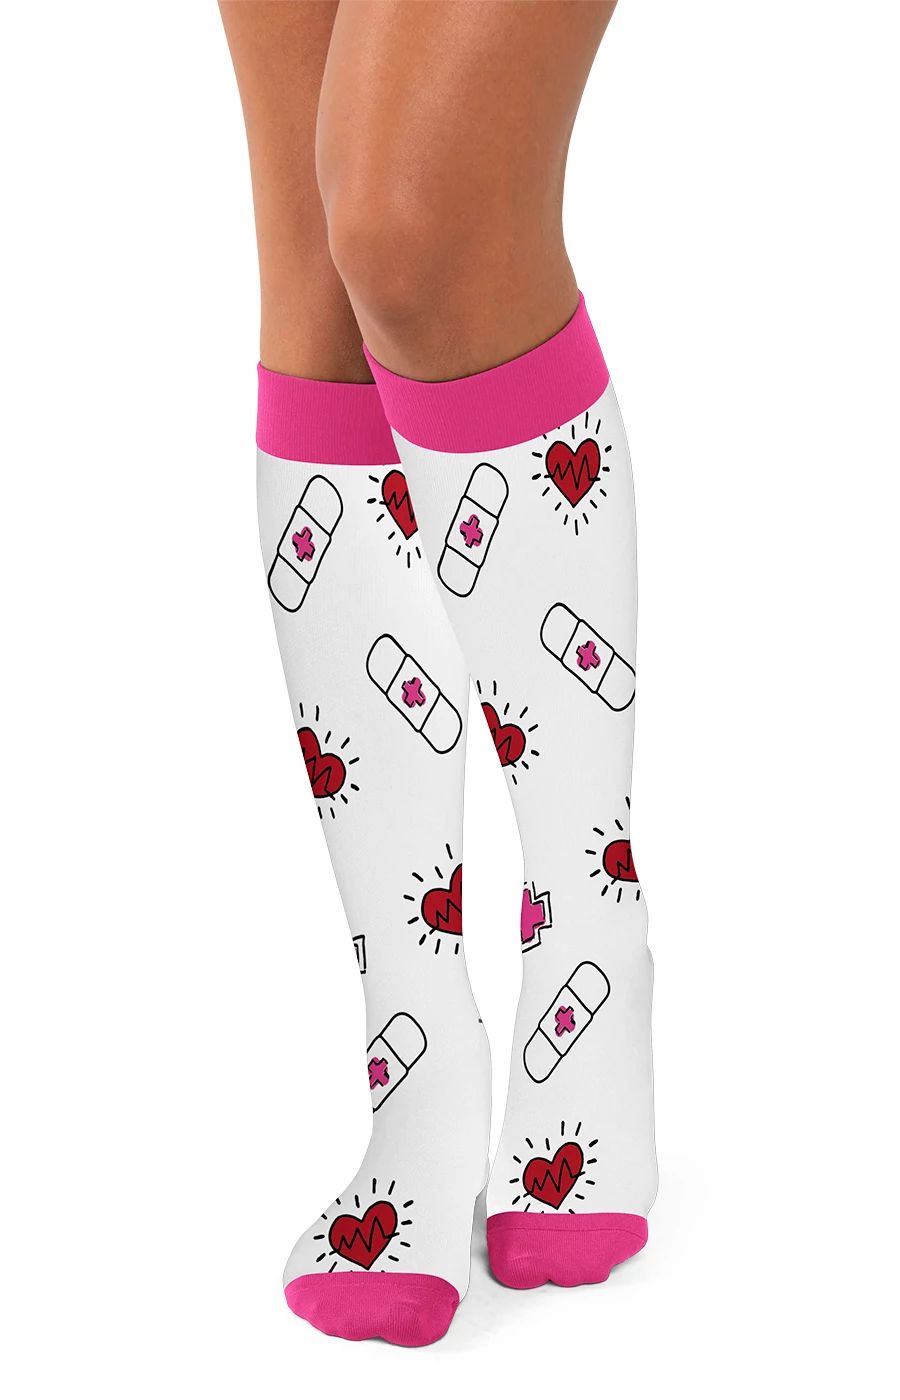 Compression Socks 2-pac Love and Care